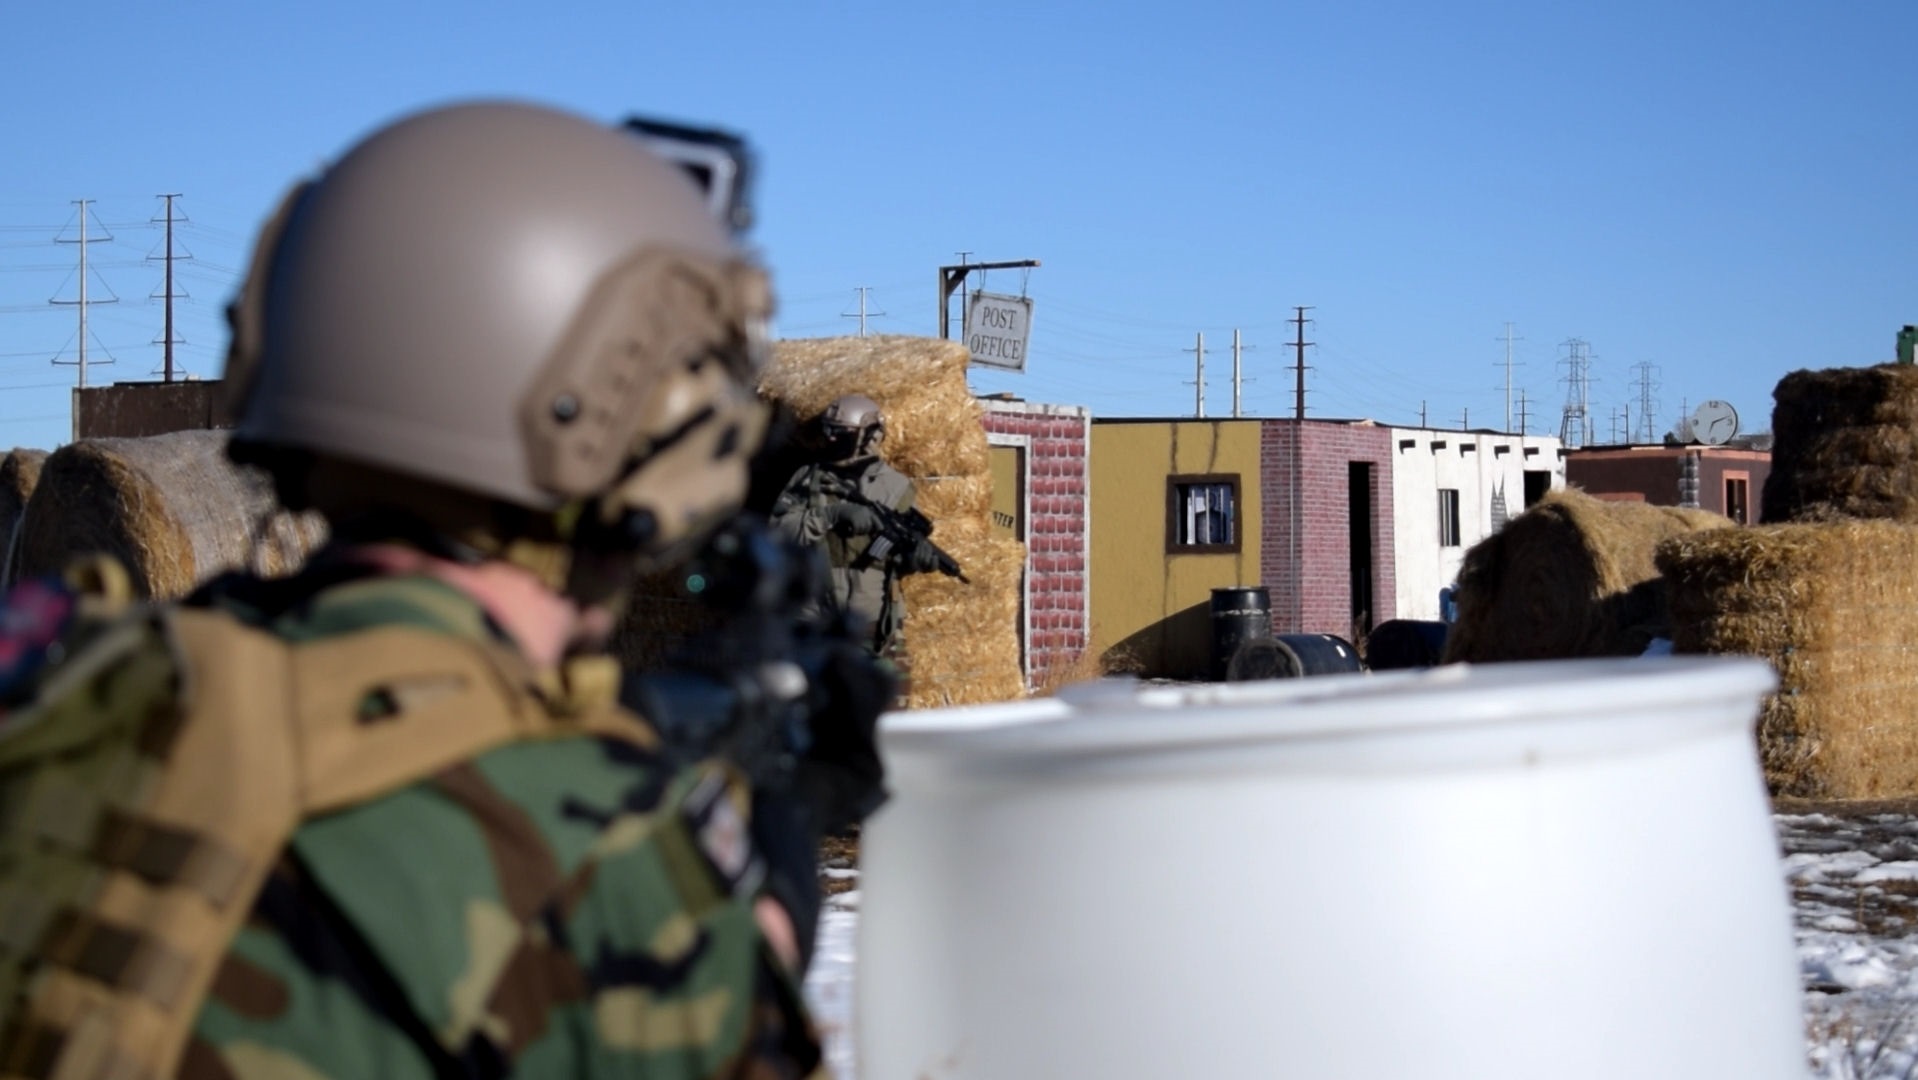 Airsoft player in combat gear observing through rifle scope with blurred foreground, urban landscape and hay bales in the background.